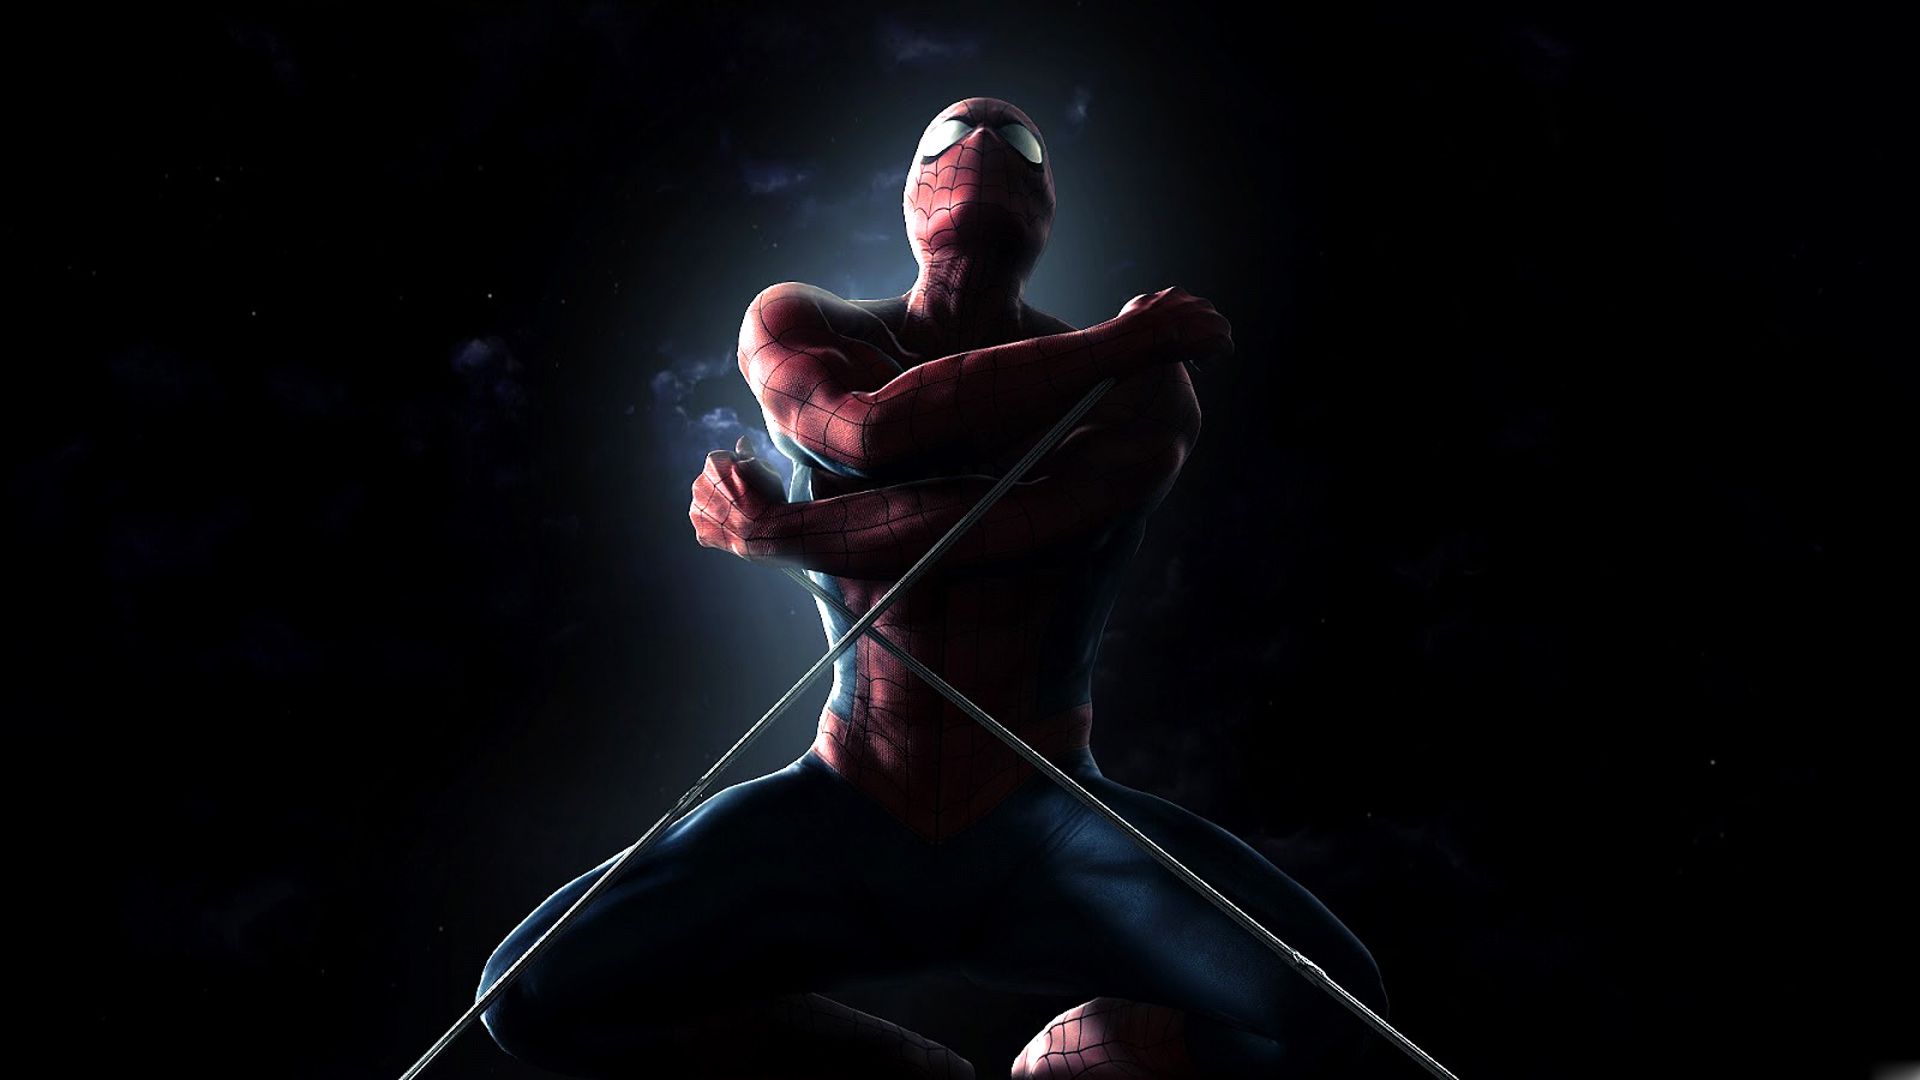 The Amazing Spiderman 2 Wide Exclusive HD Wallpapers #6529